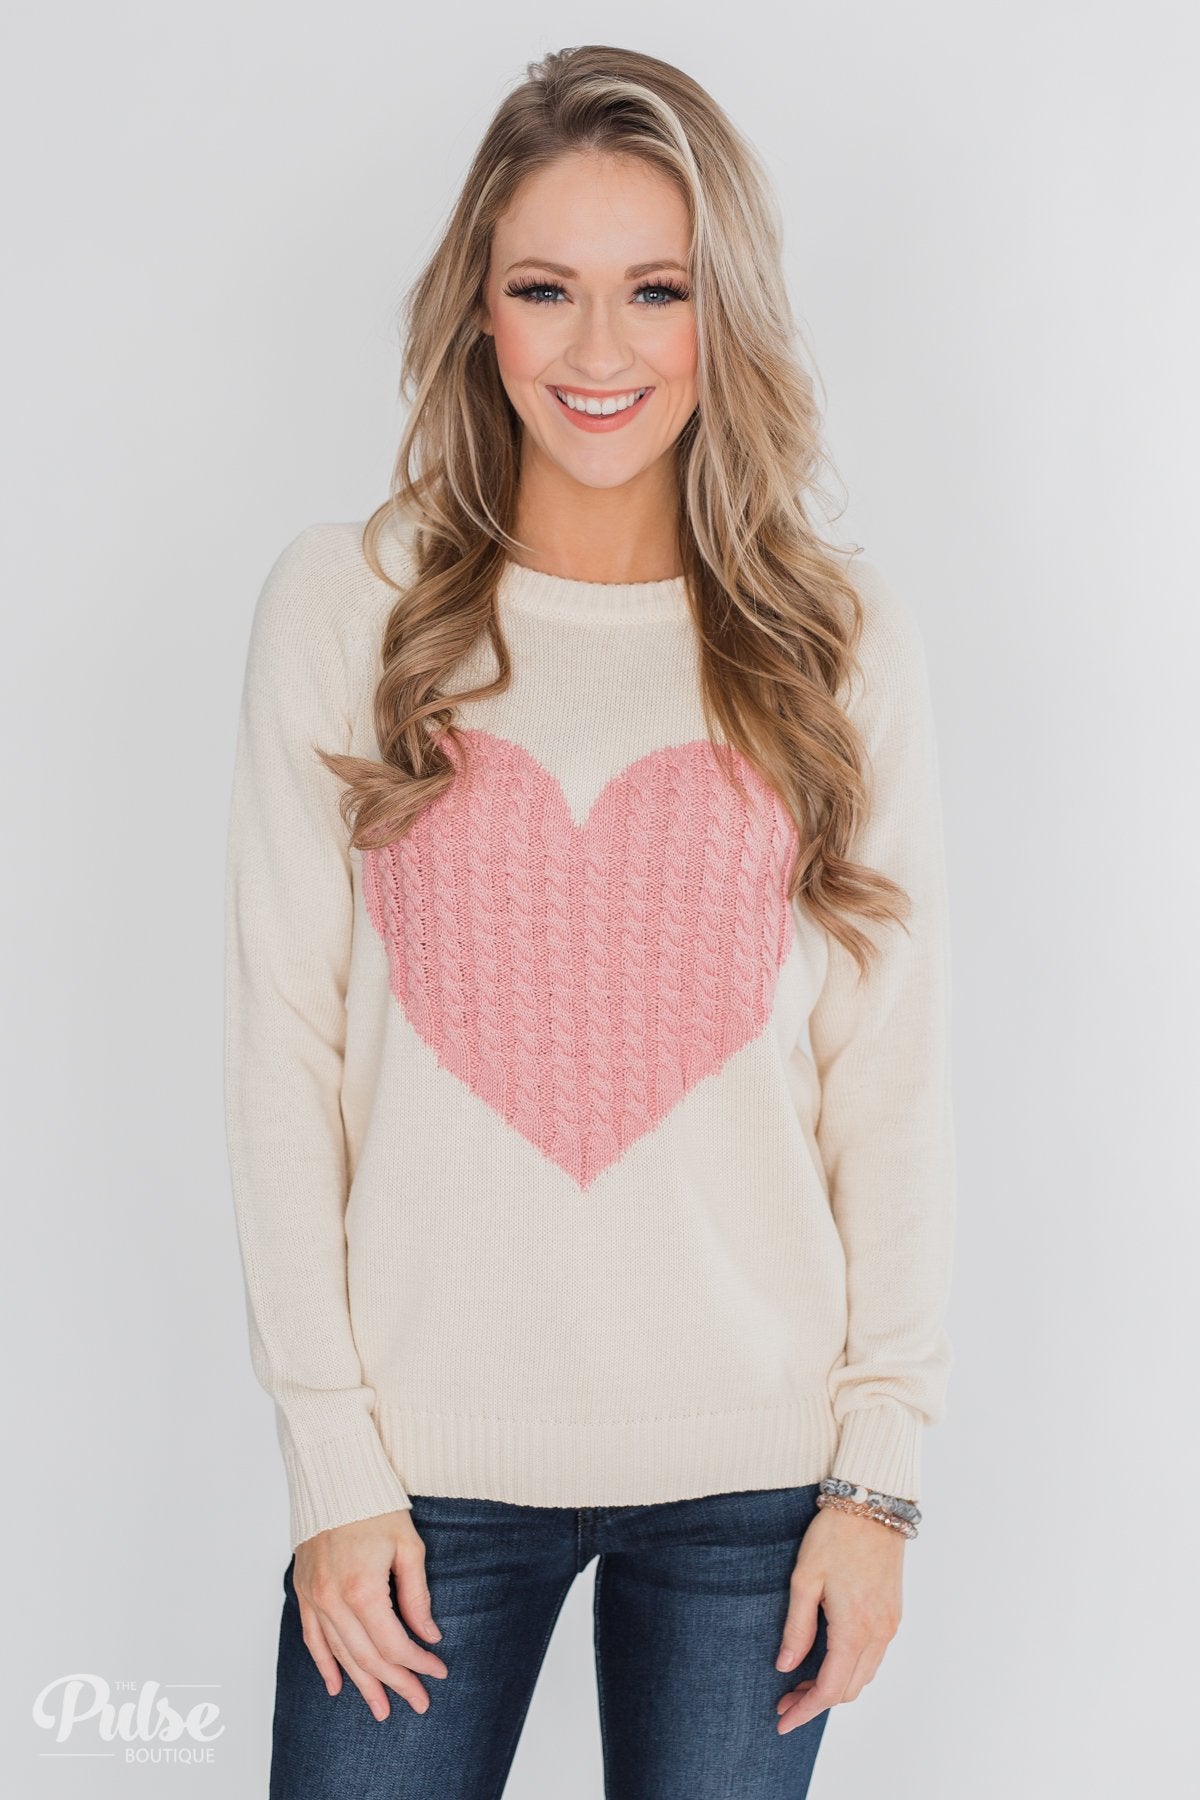 Follow Your Heart Knitted Sweater- Cream